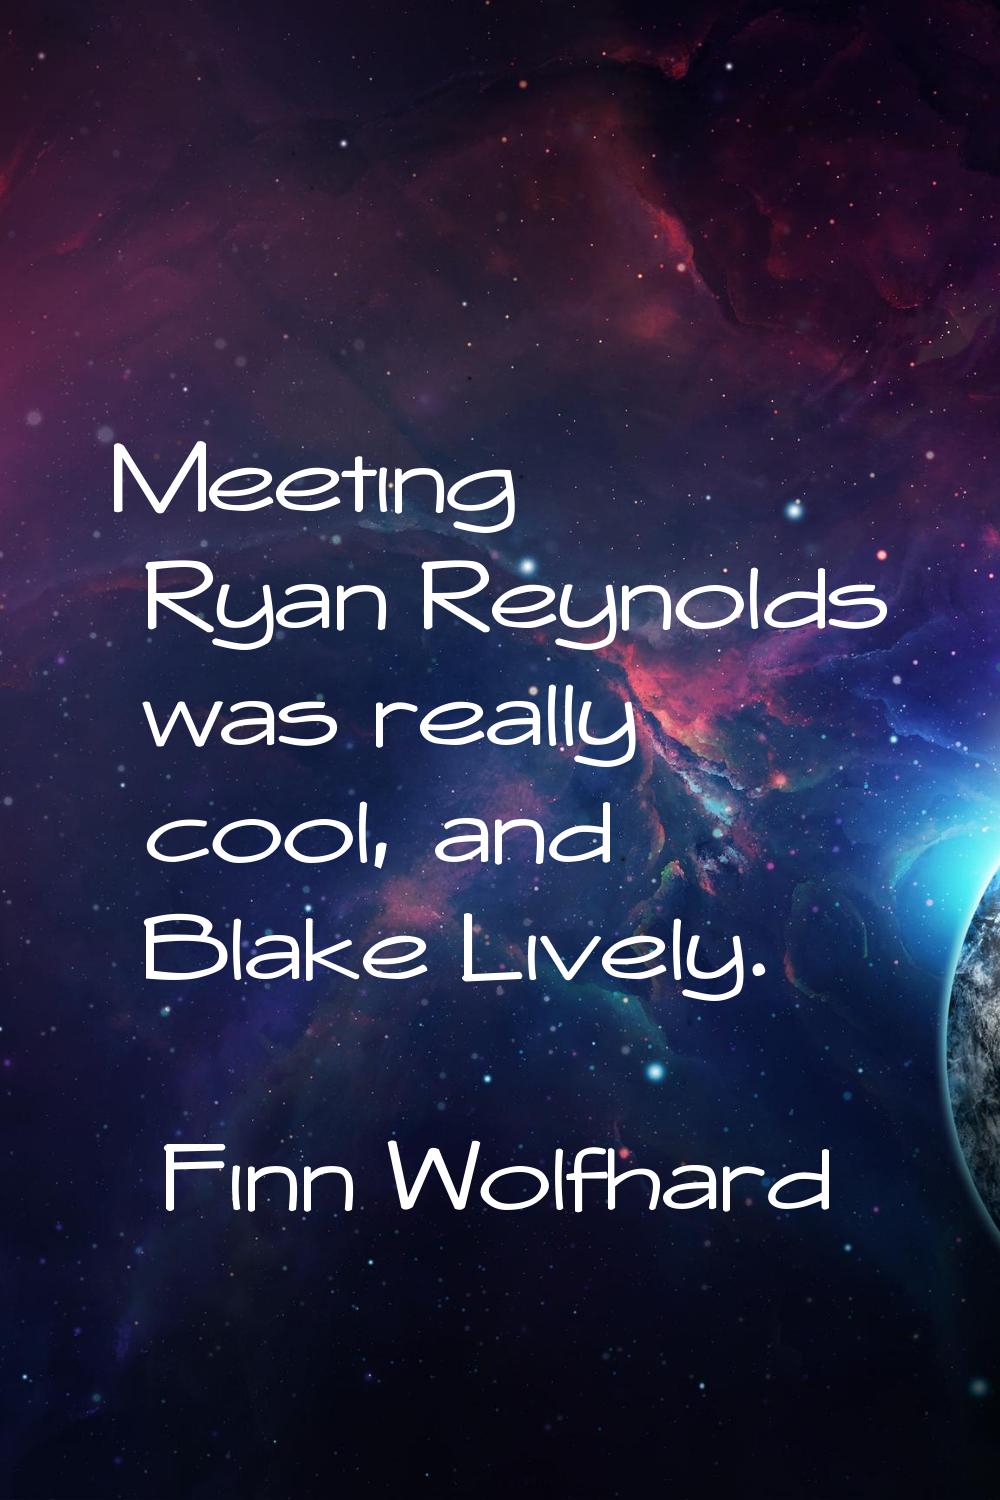 Meeting Ryan Reynolds was really cool, and Blake Lively.